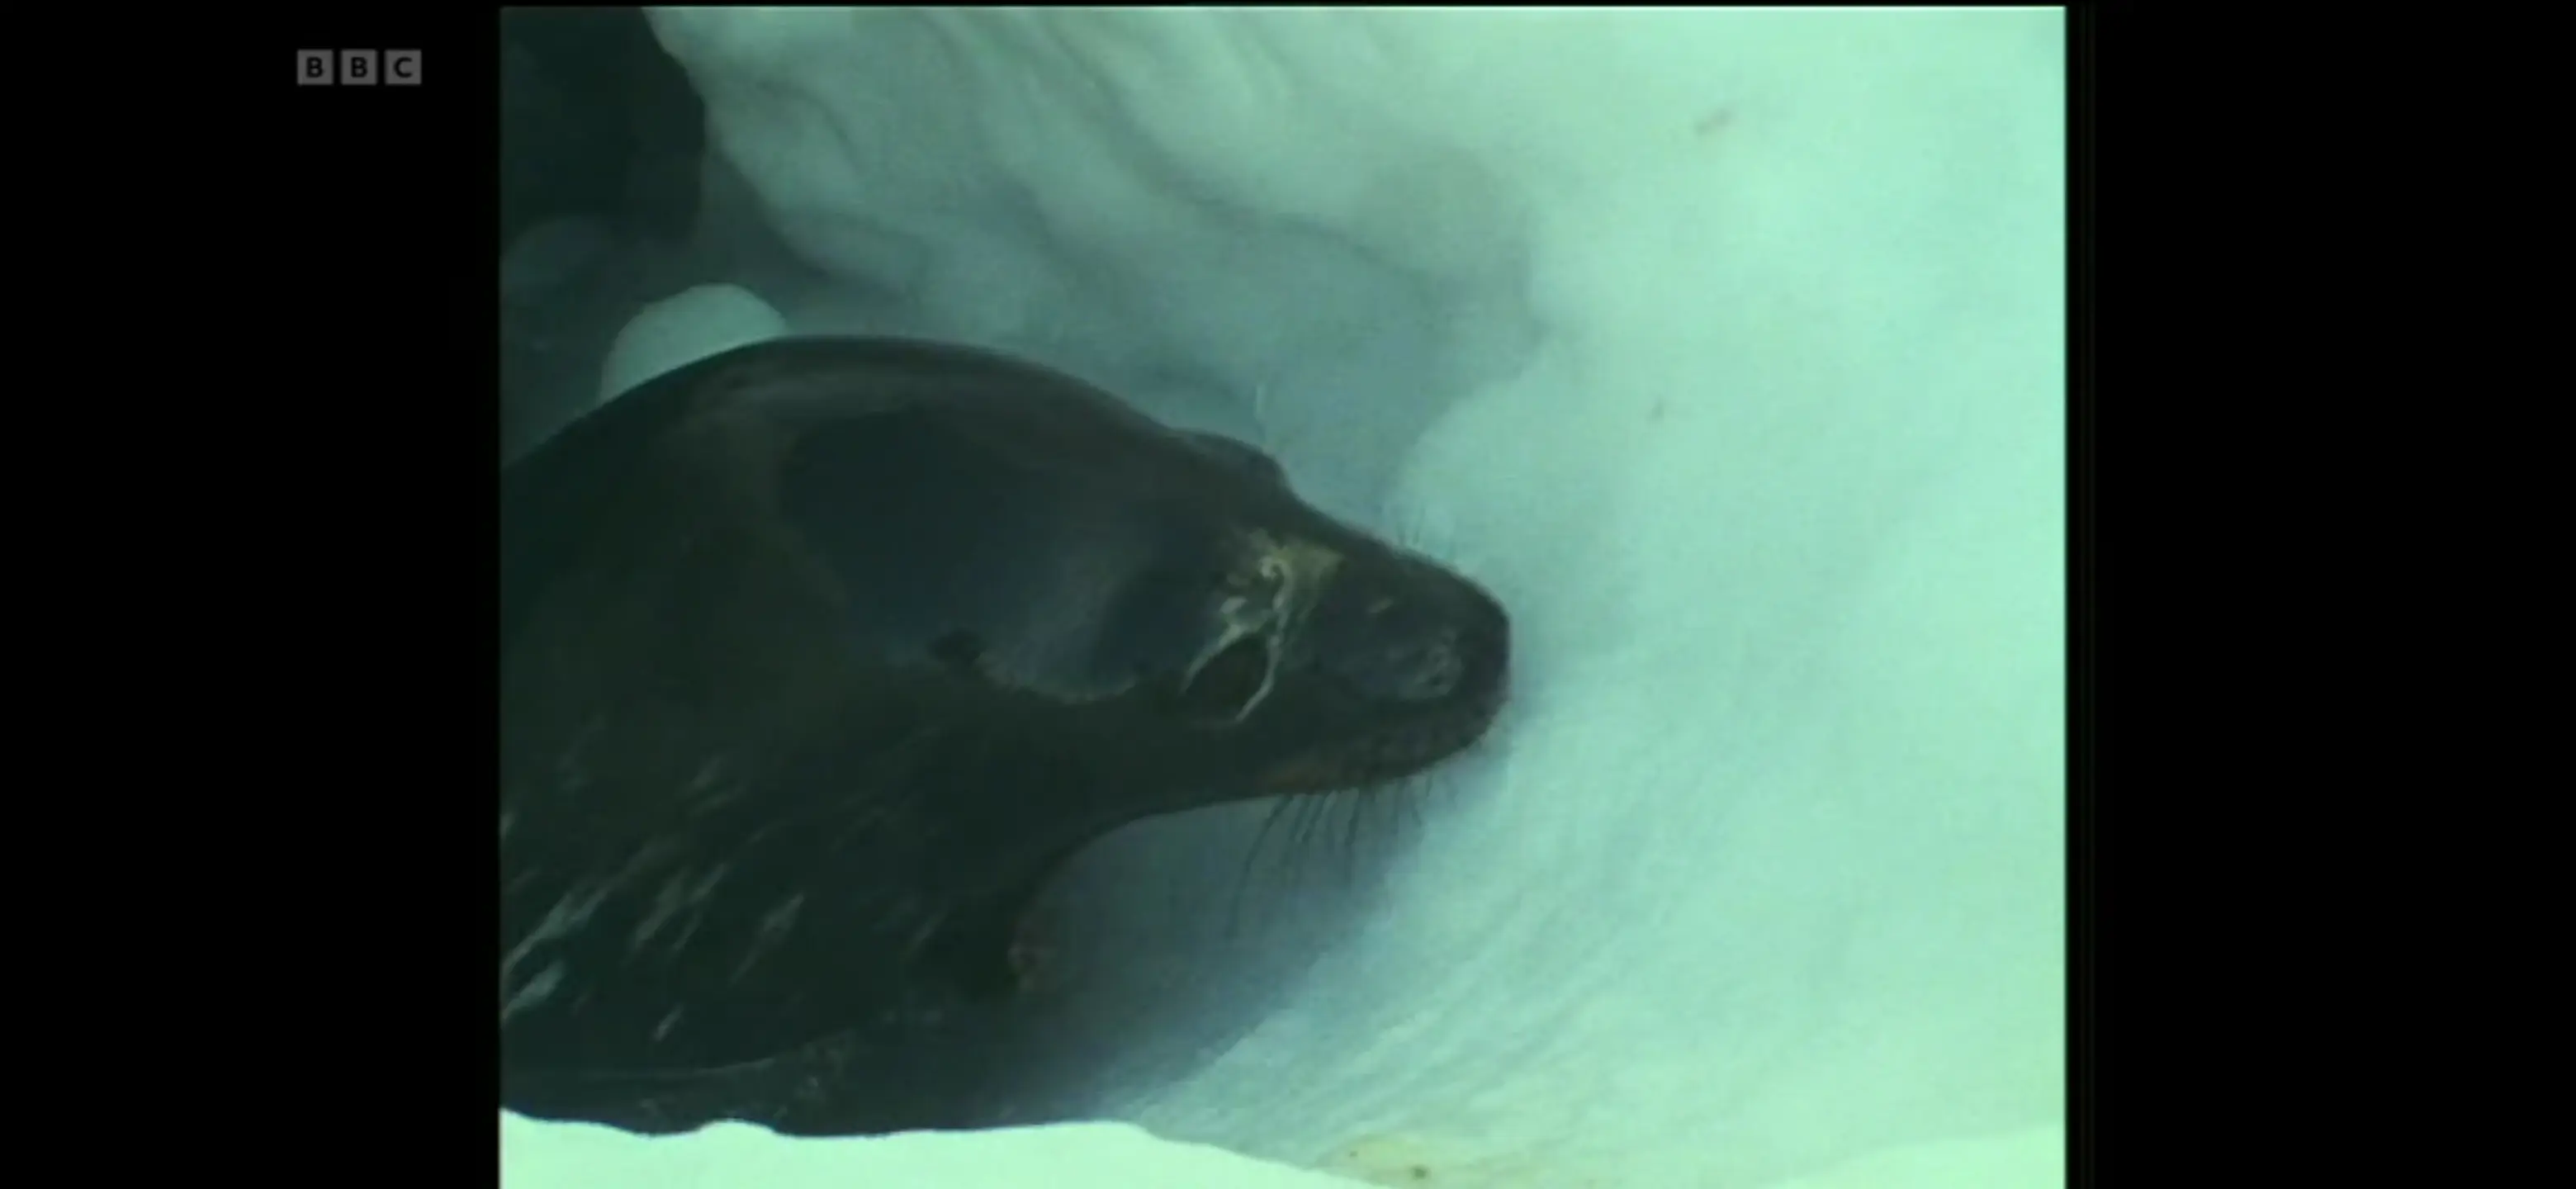 Weddell seal (Leptonychotes weddellii) as shown in Life in the Freezer - The Big Freeze